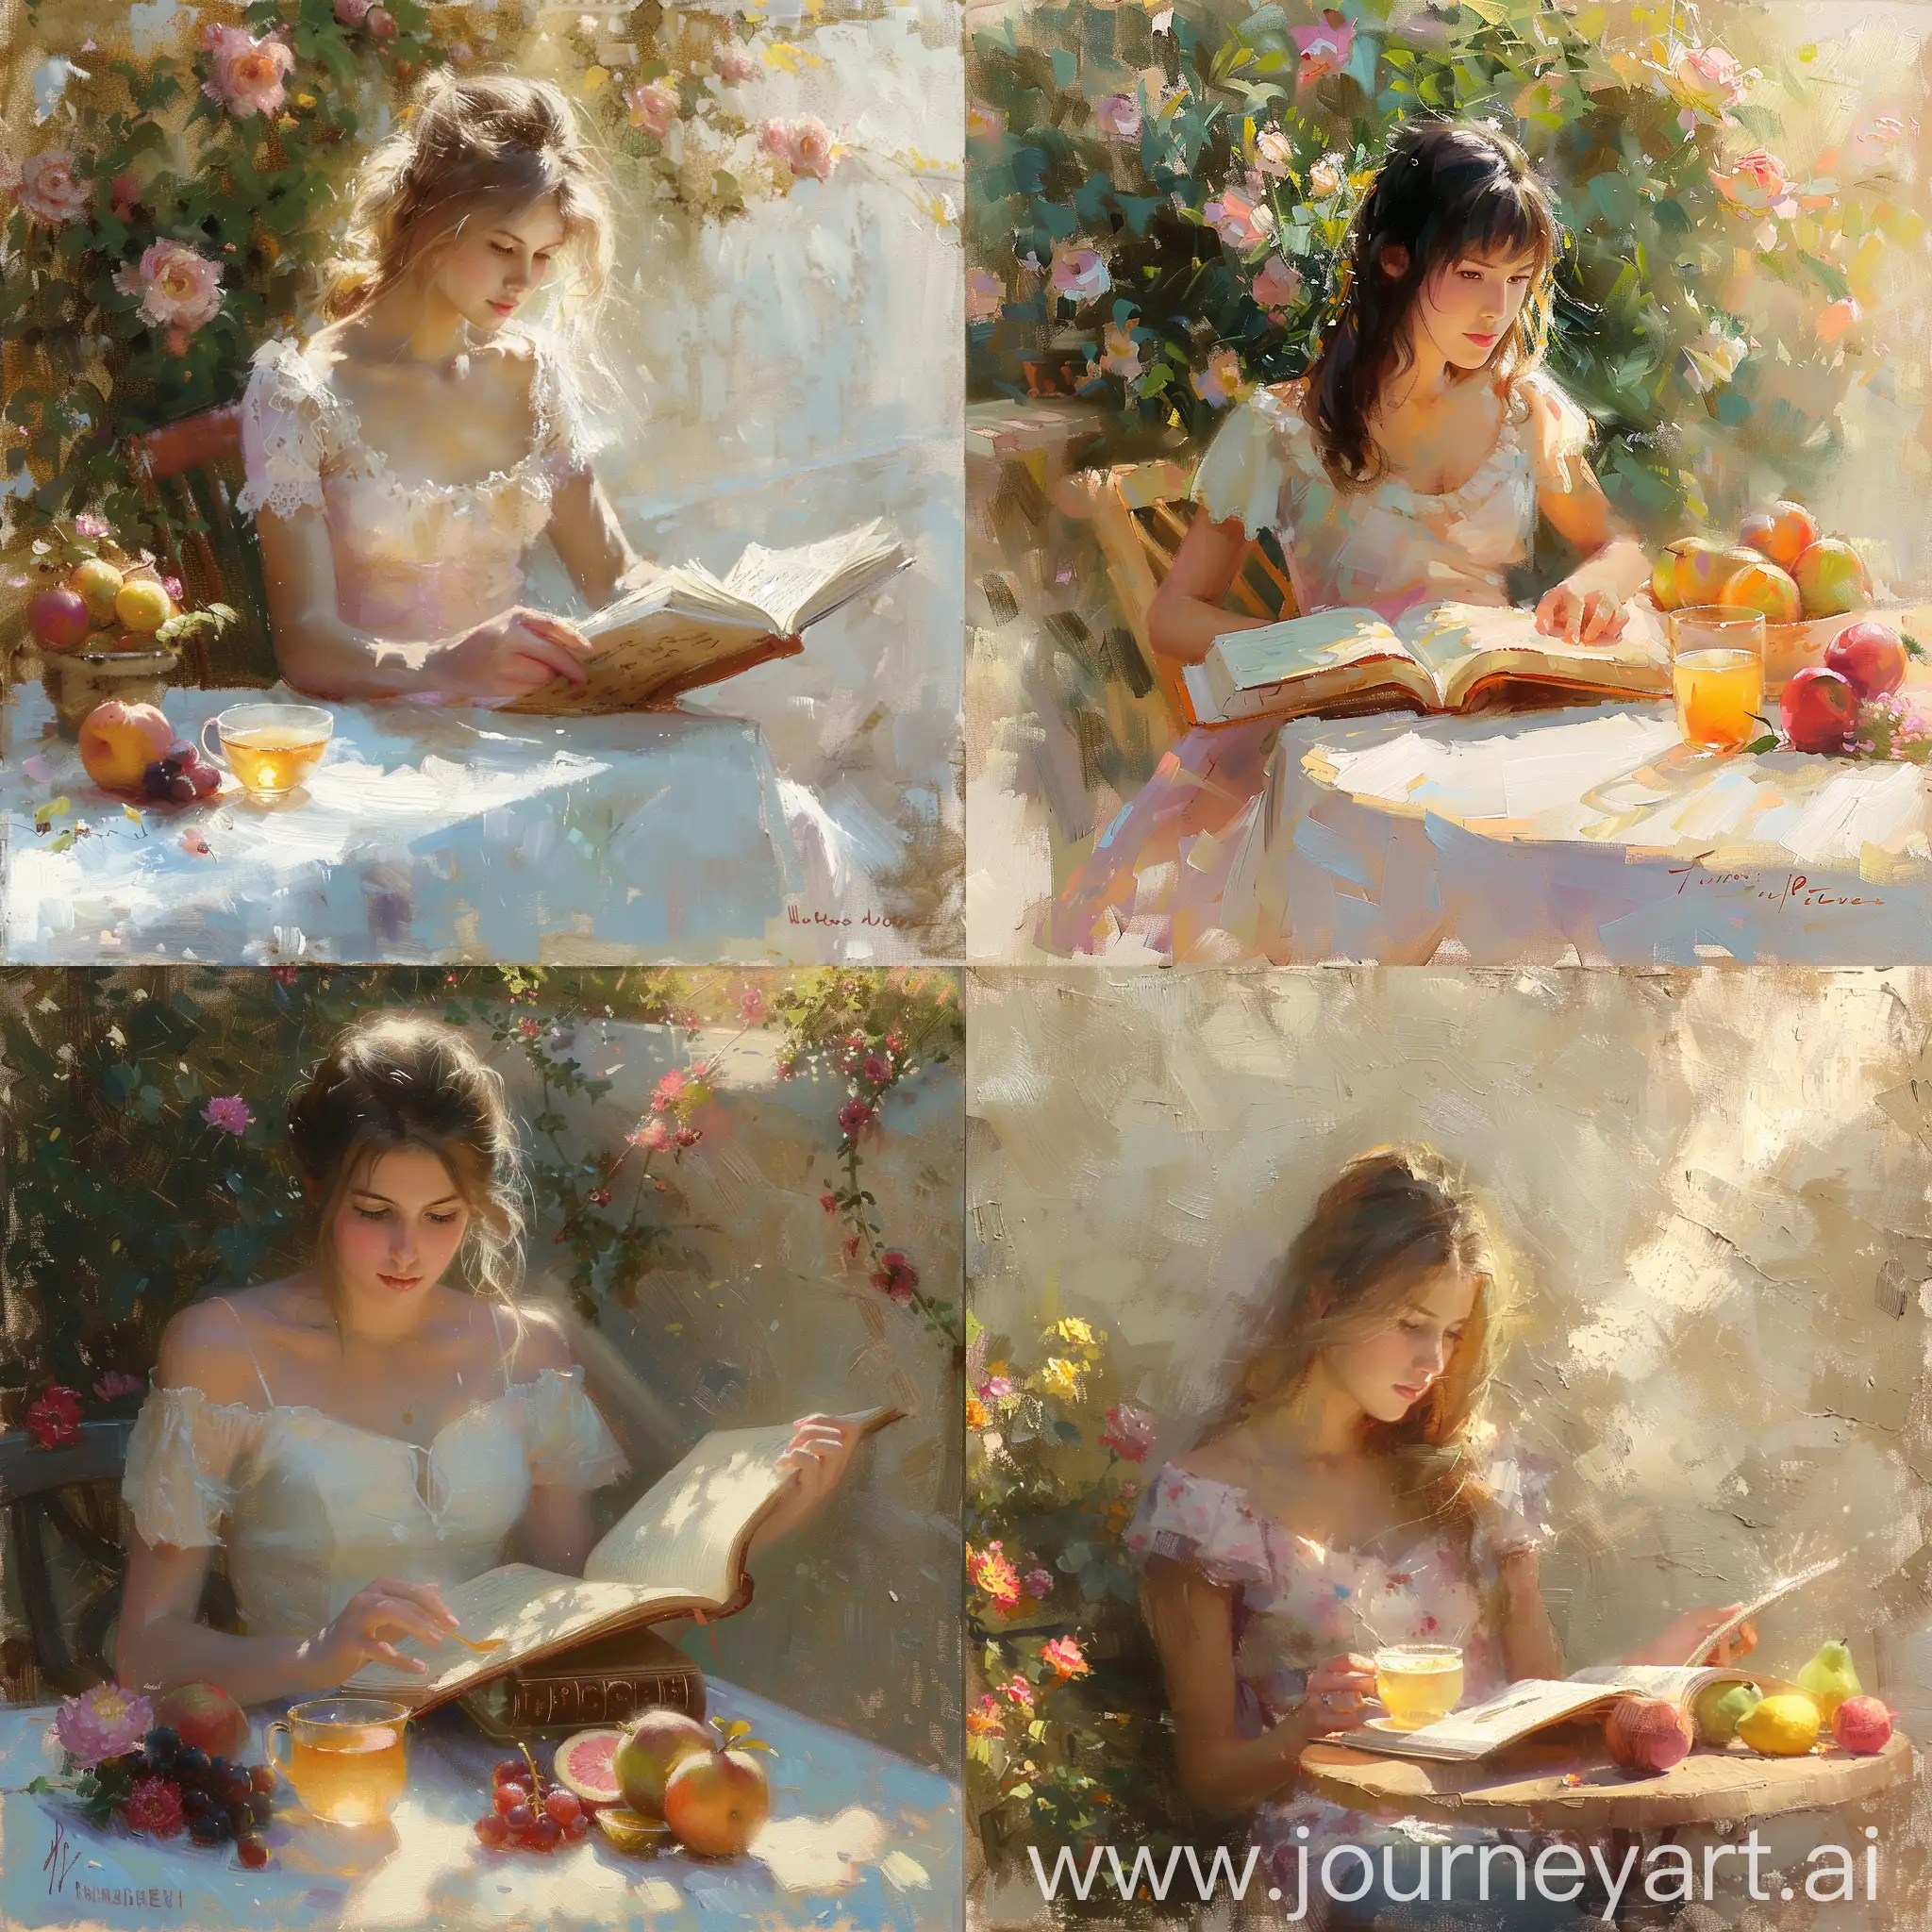 Serene-Woman-Enjoying-Afternoon-Tea-and-Fruits-in-Soft-Sunlight